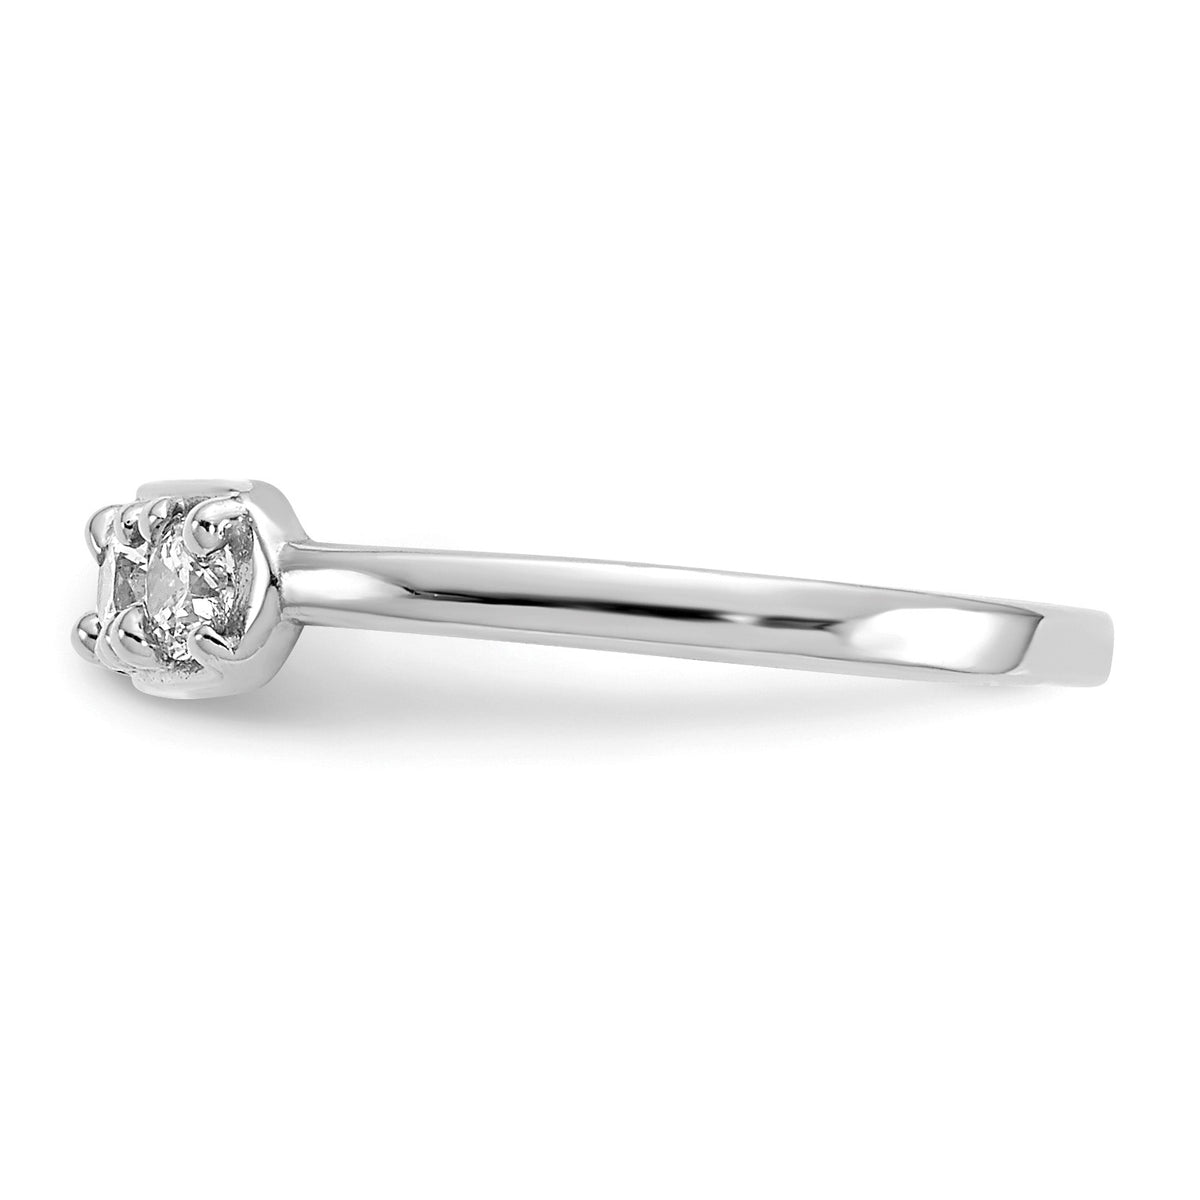 Alternate view of the Cubic Zirconia Toe Ring in 14 Karat White Gold by The Black Bow Jewelry Co.